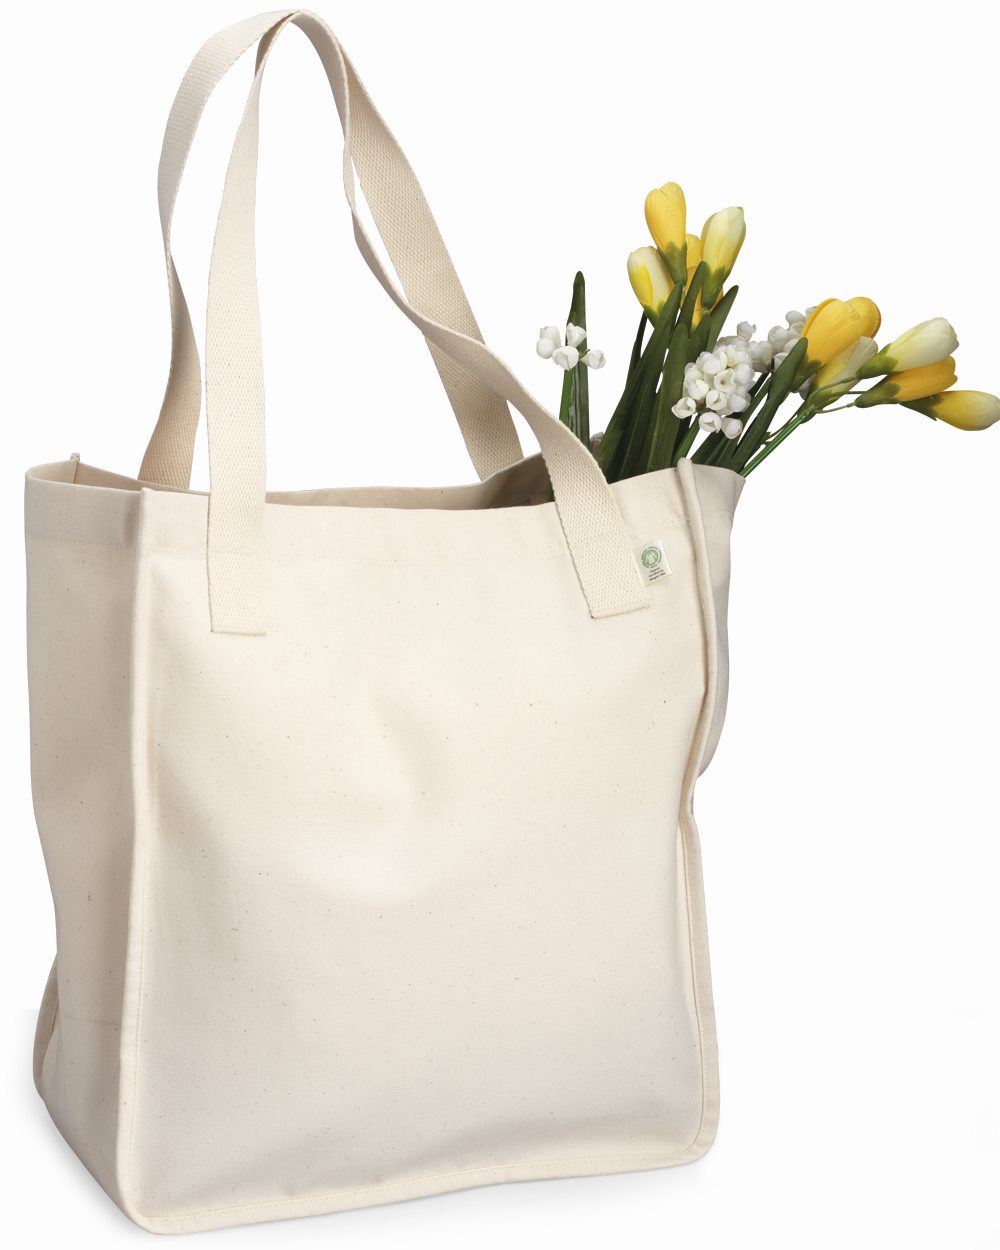 carry on tote bag